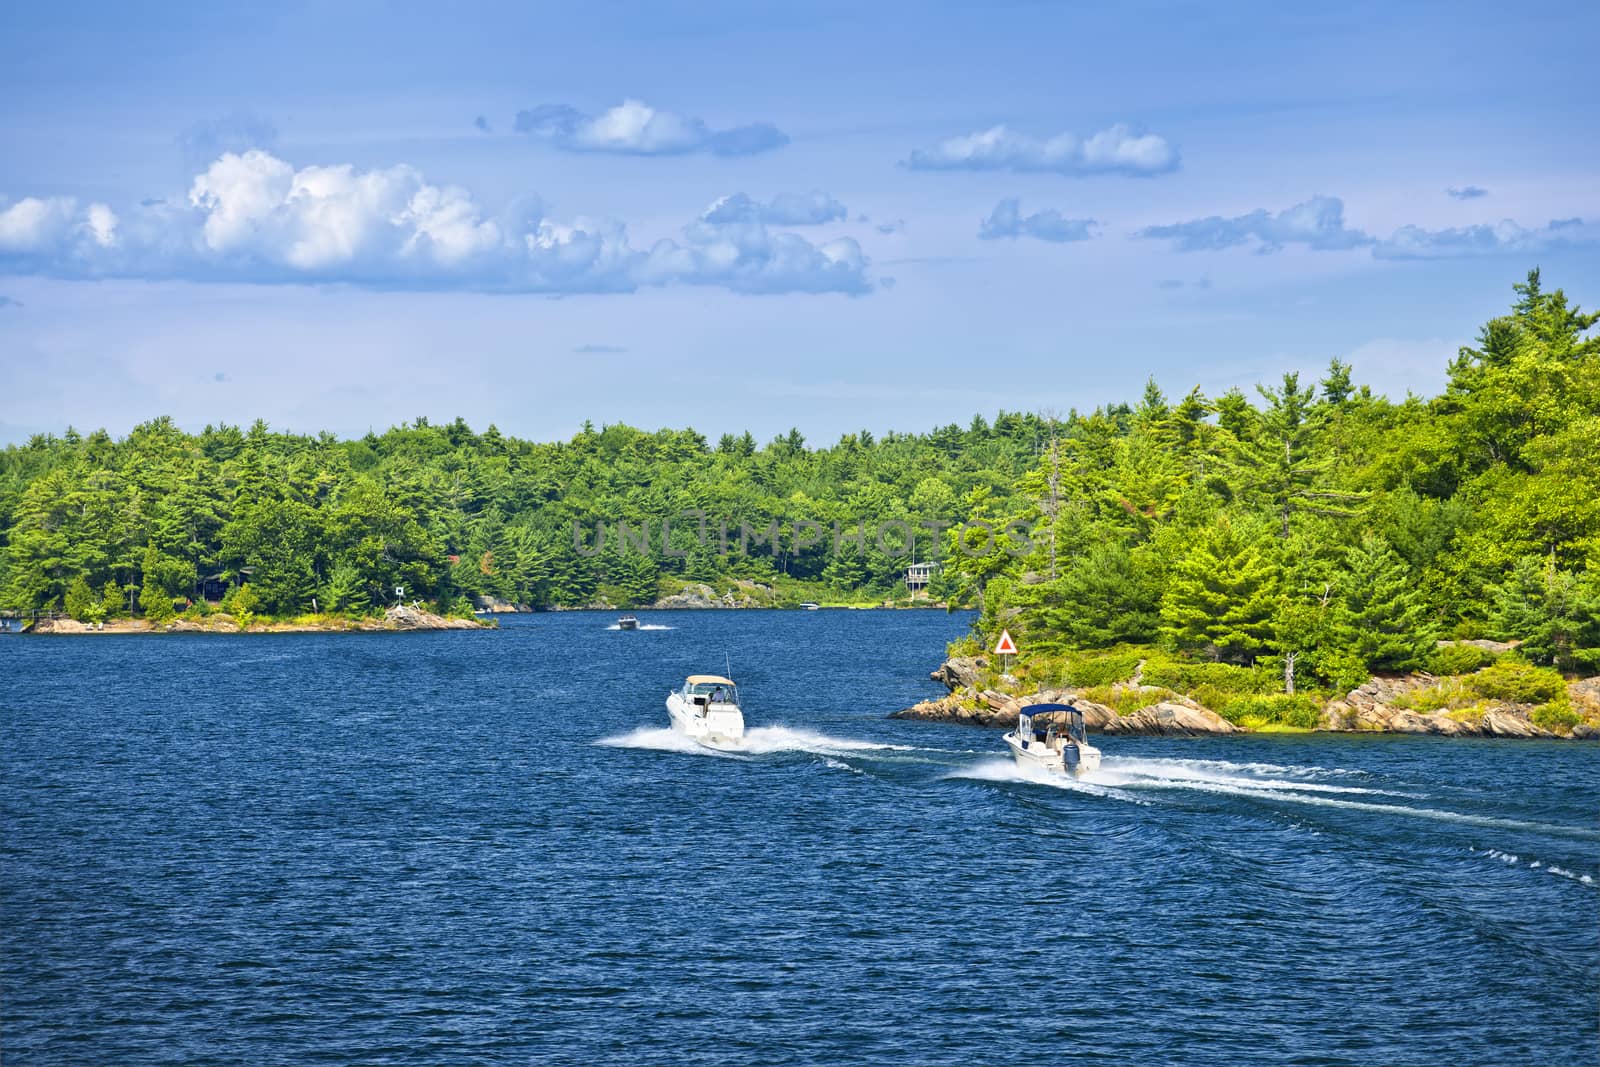 Recreational boats on blue waters of Georgian Bay near Parry Sound, Ontario Canada